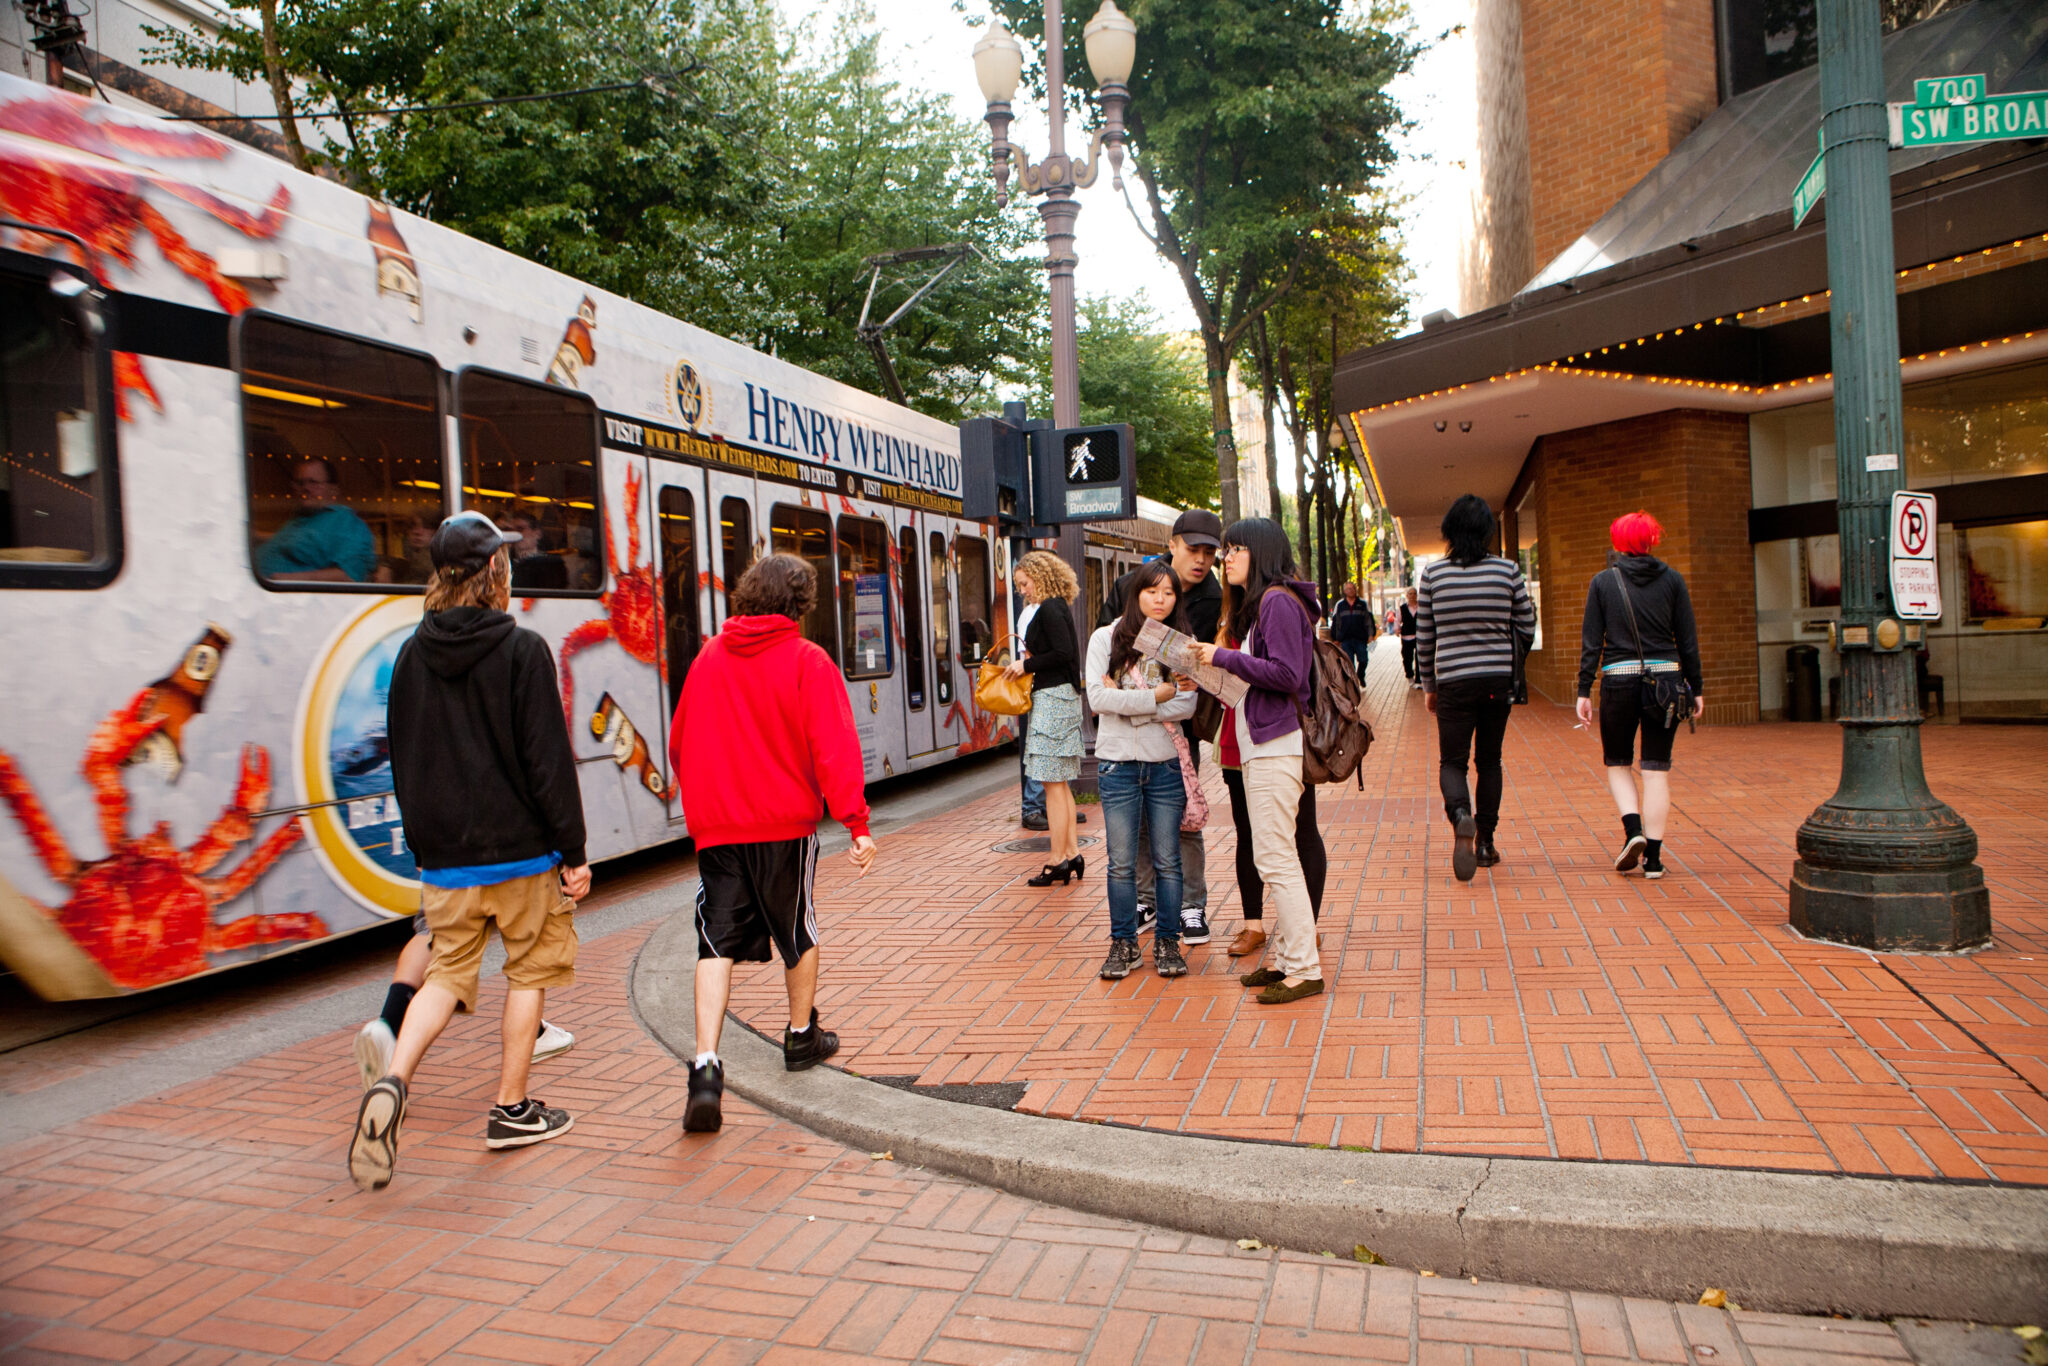 "Portland, Oregon, USA - September 13, 2011: People walking on the sidewalk and waiting for the MAX lightrail in downtown Portland."